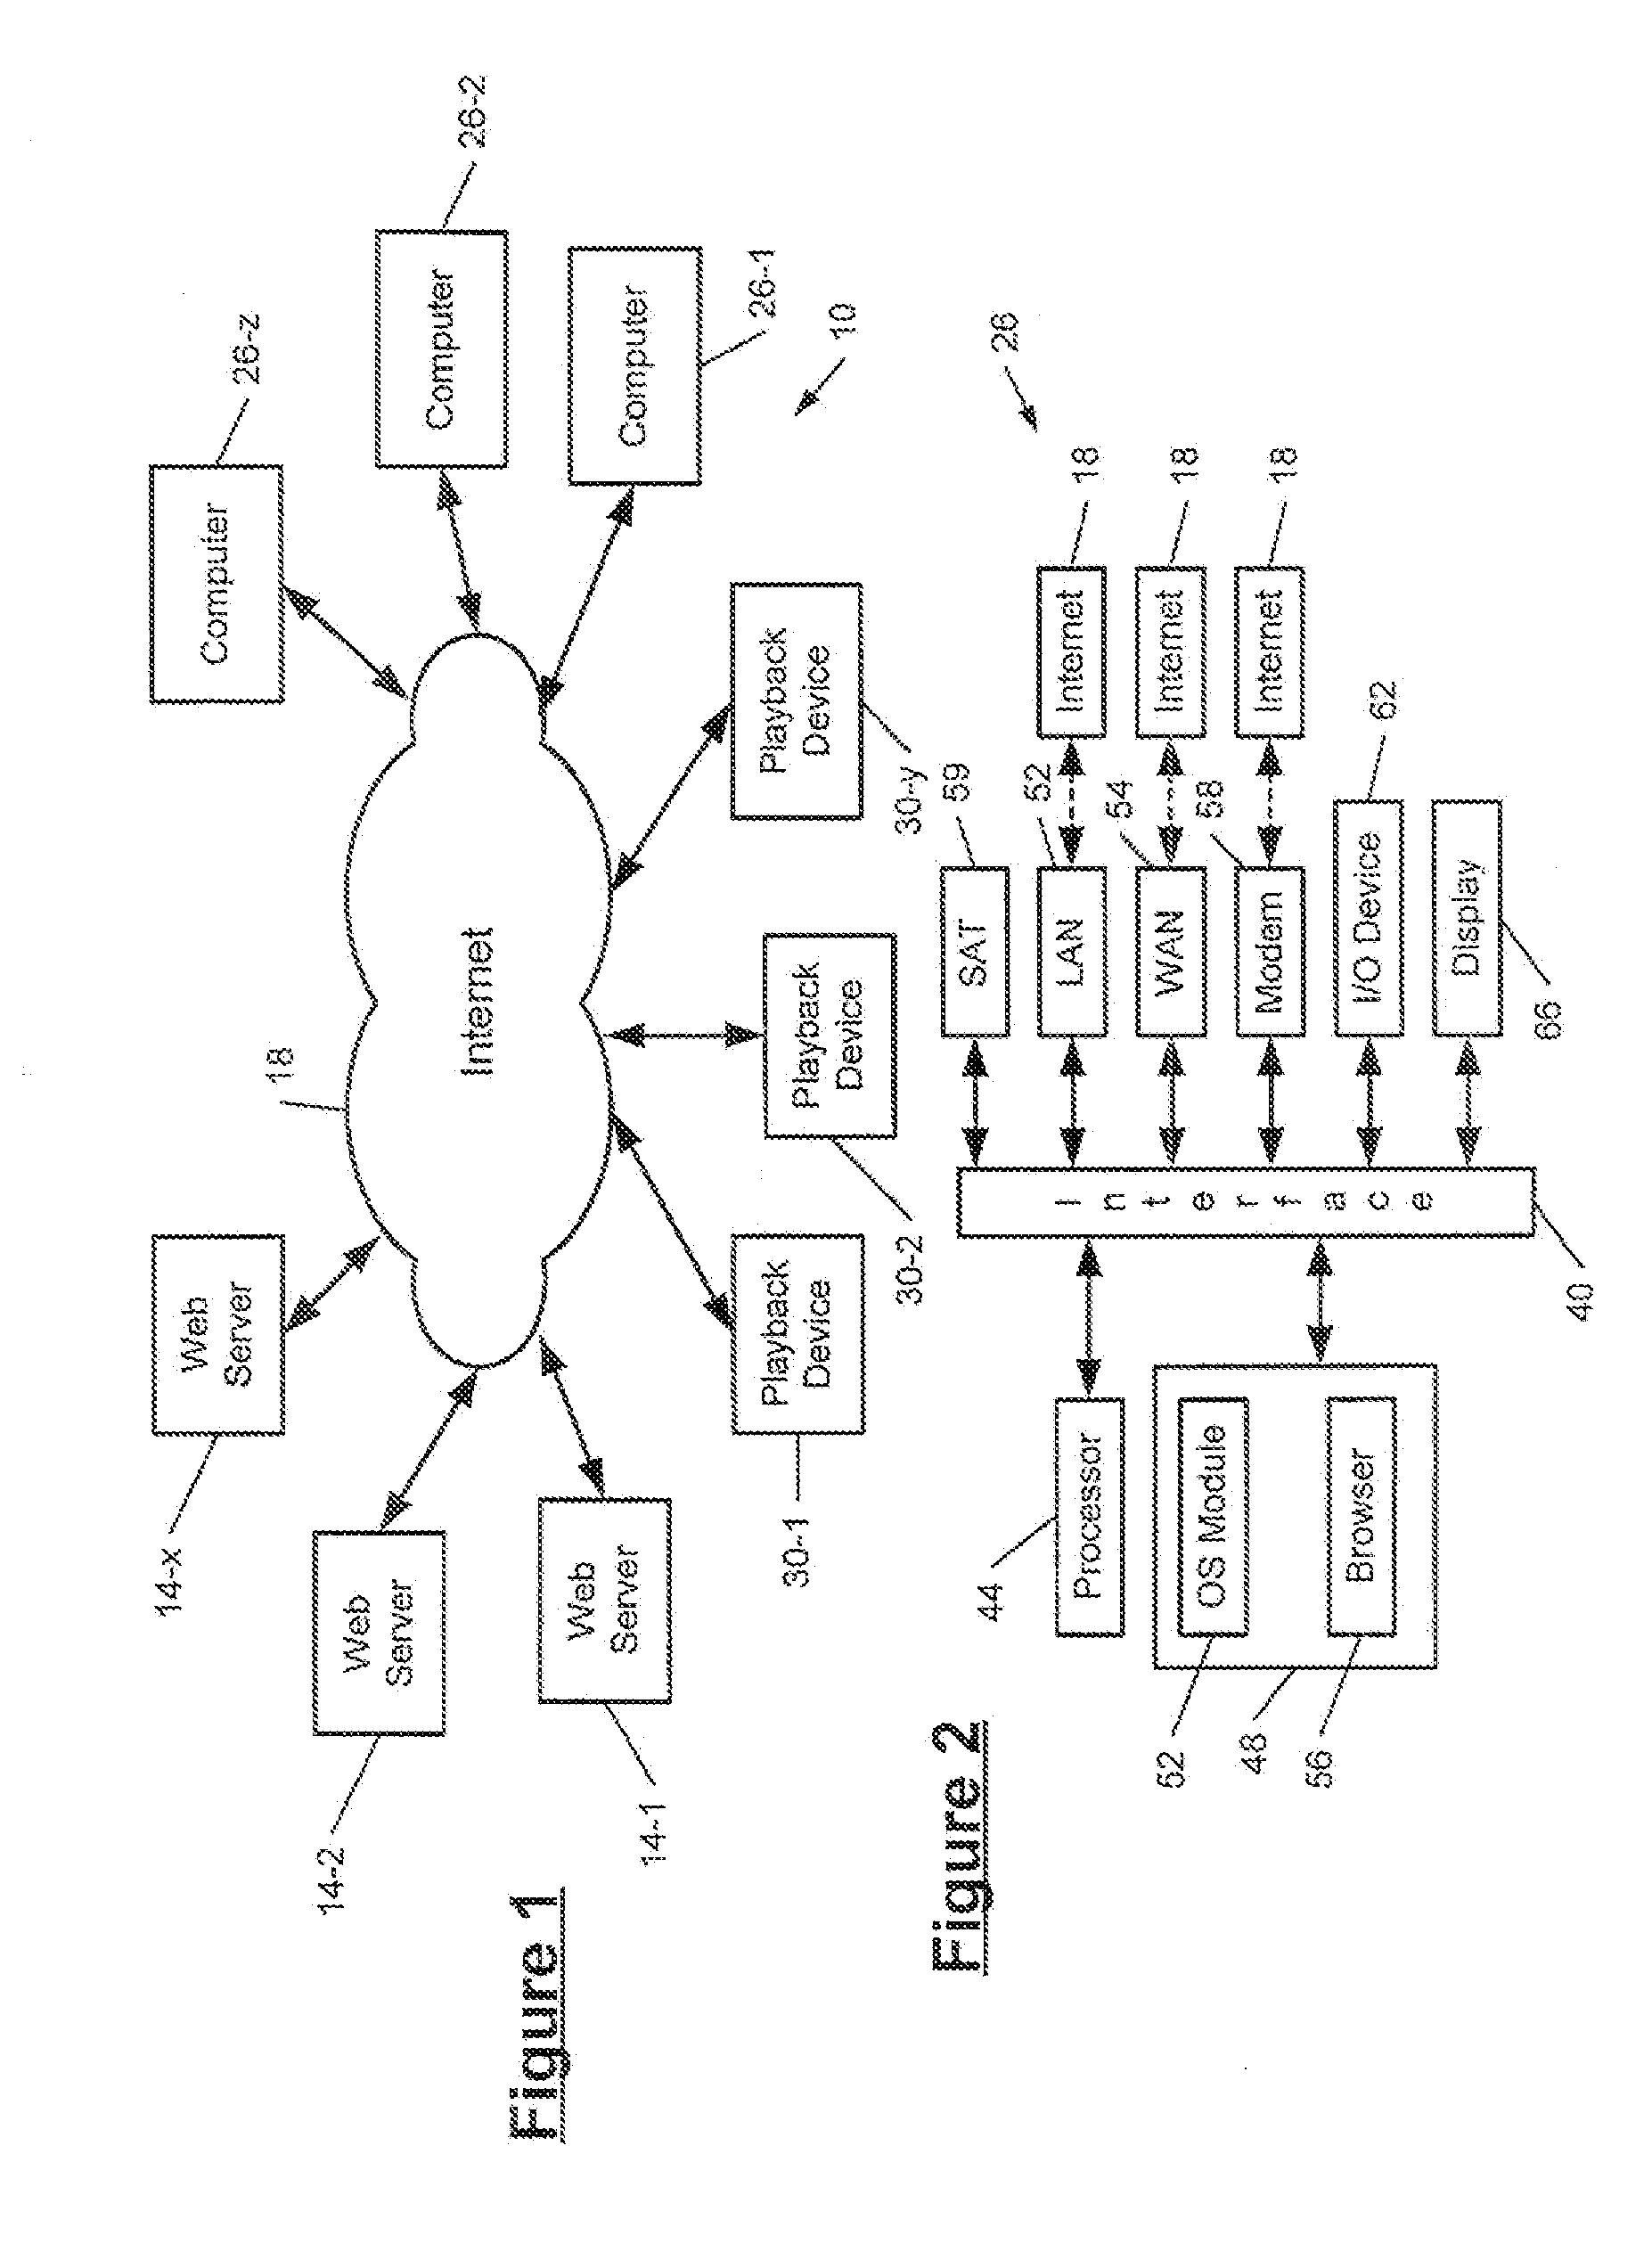 Distributed control for a continuous play background music system